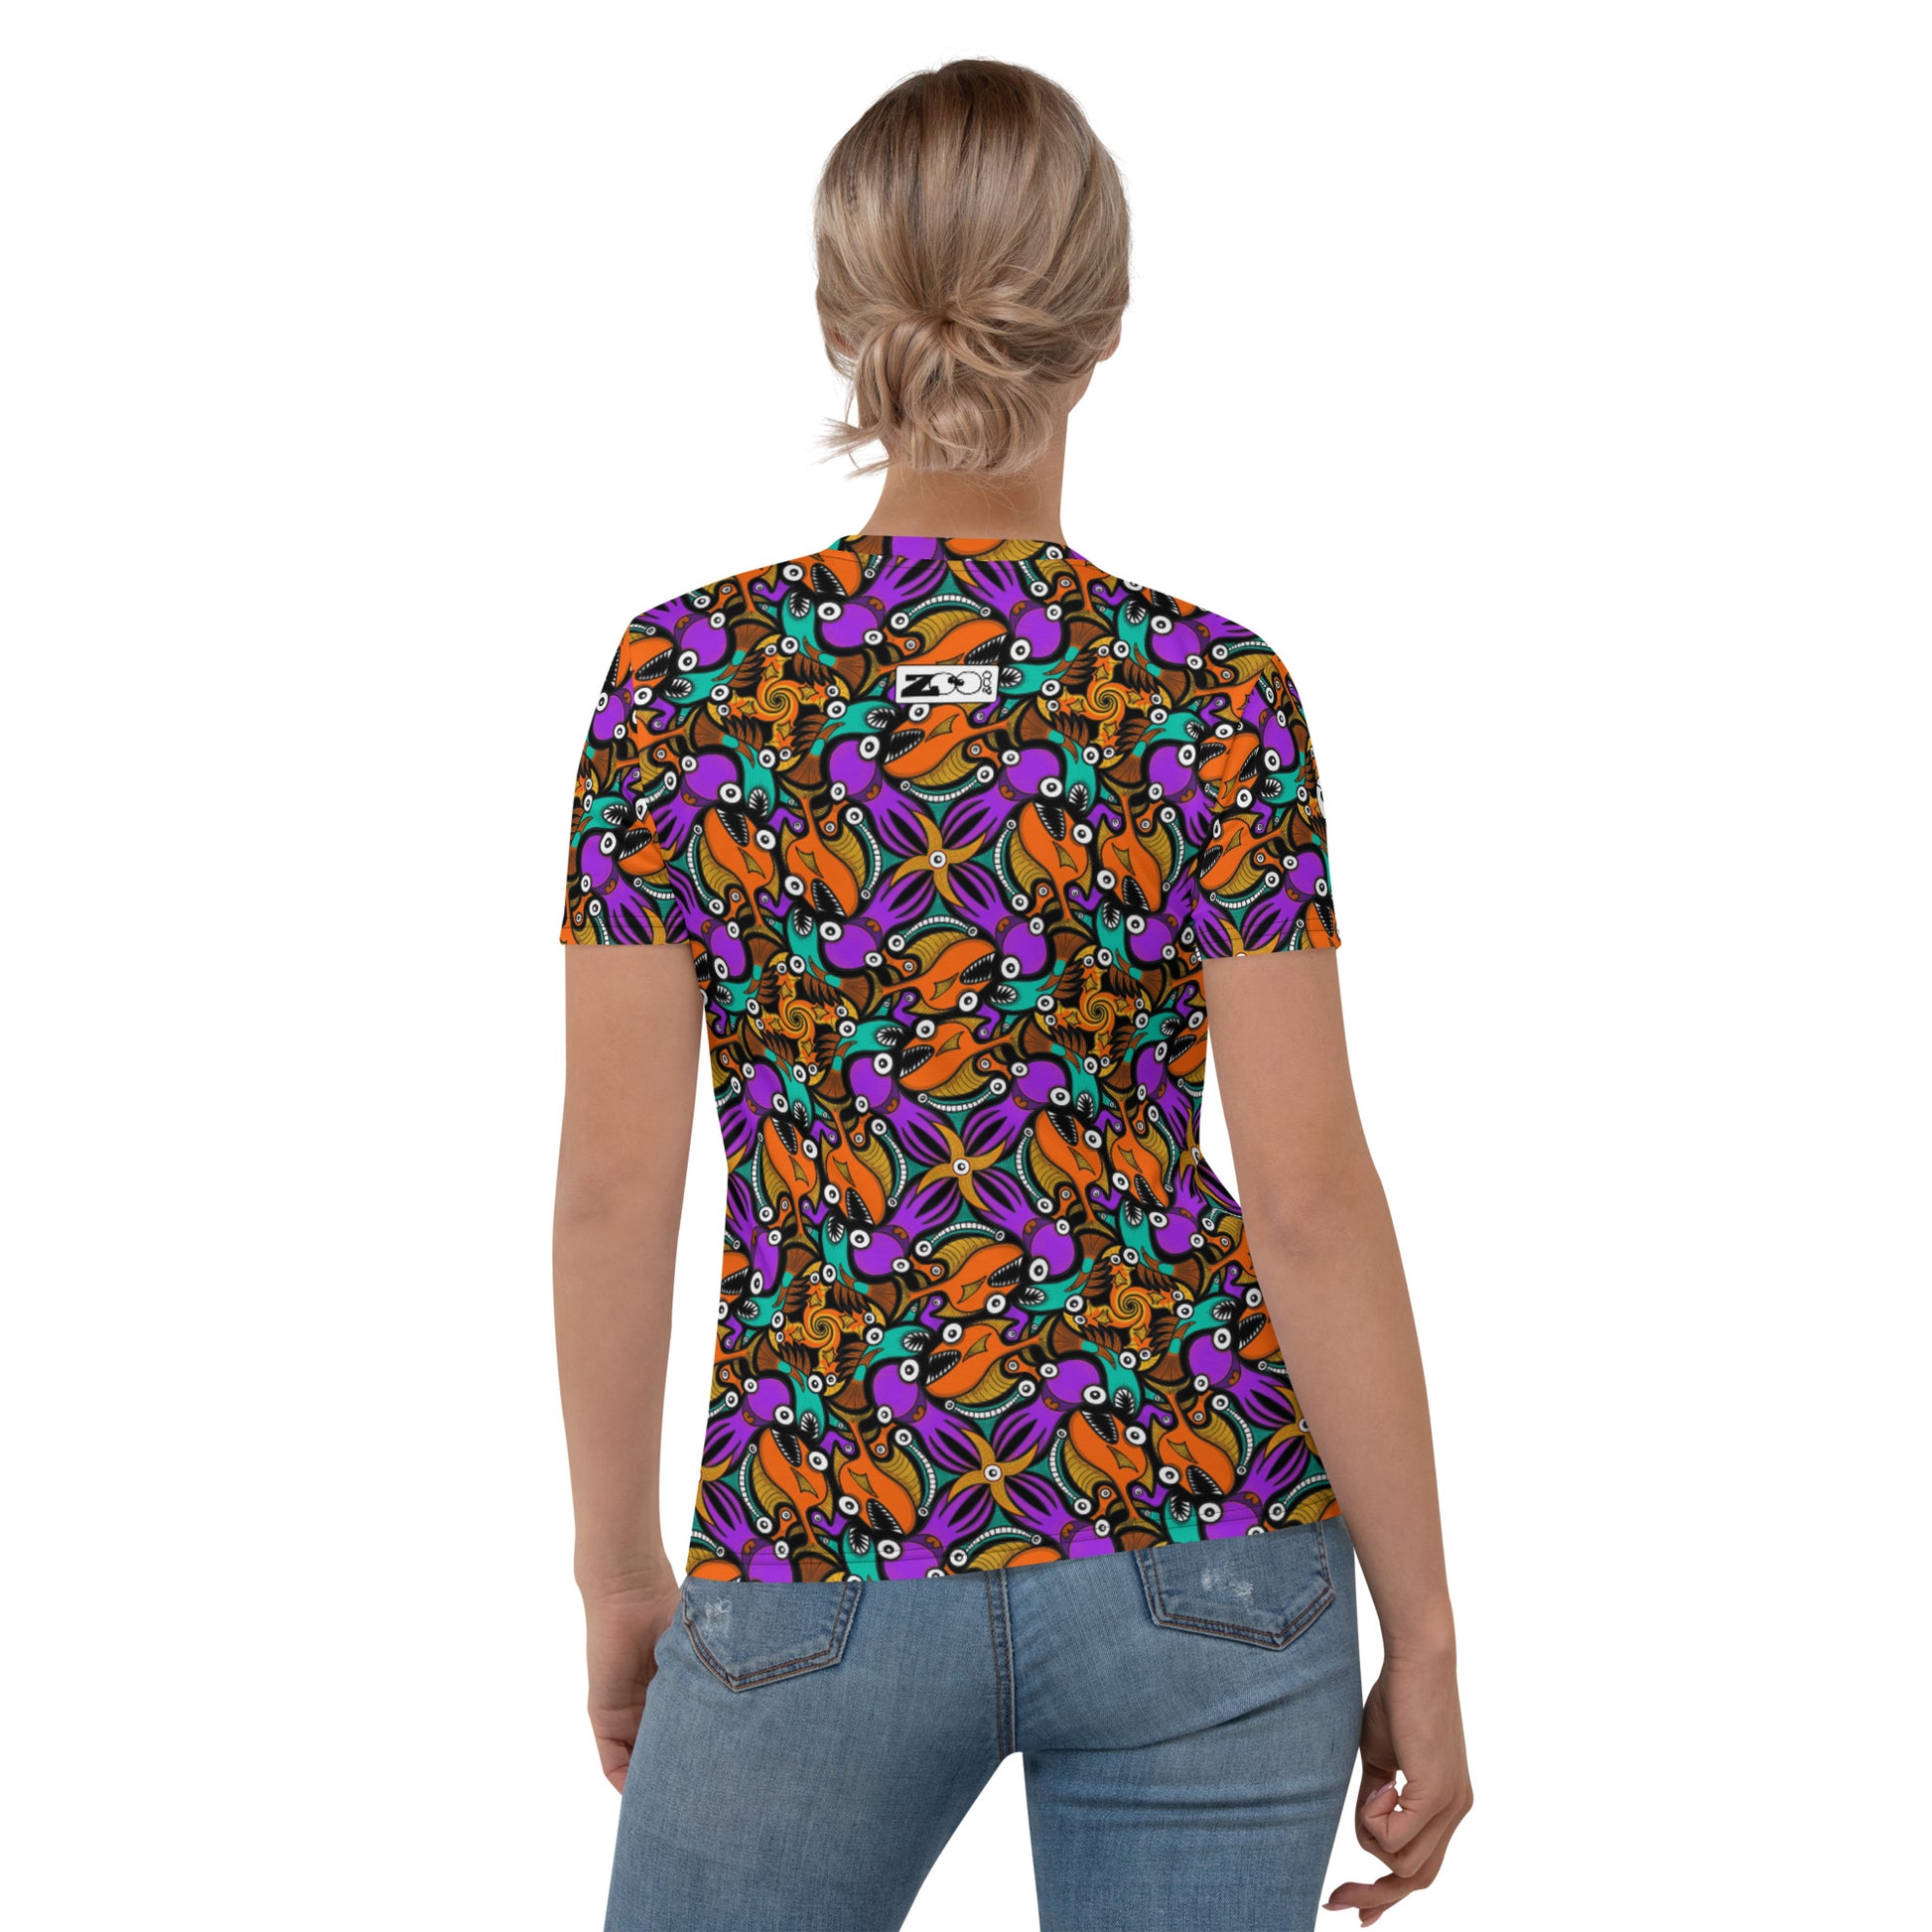 Mesmerizing creatures straight from the deep ocean Women's T-shirt. Back view